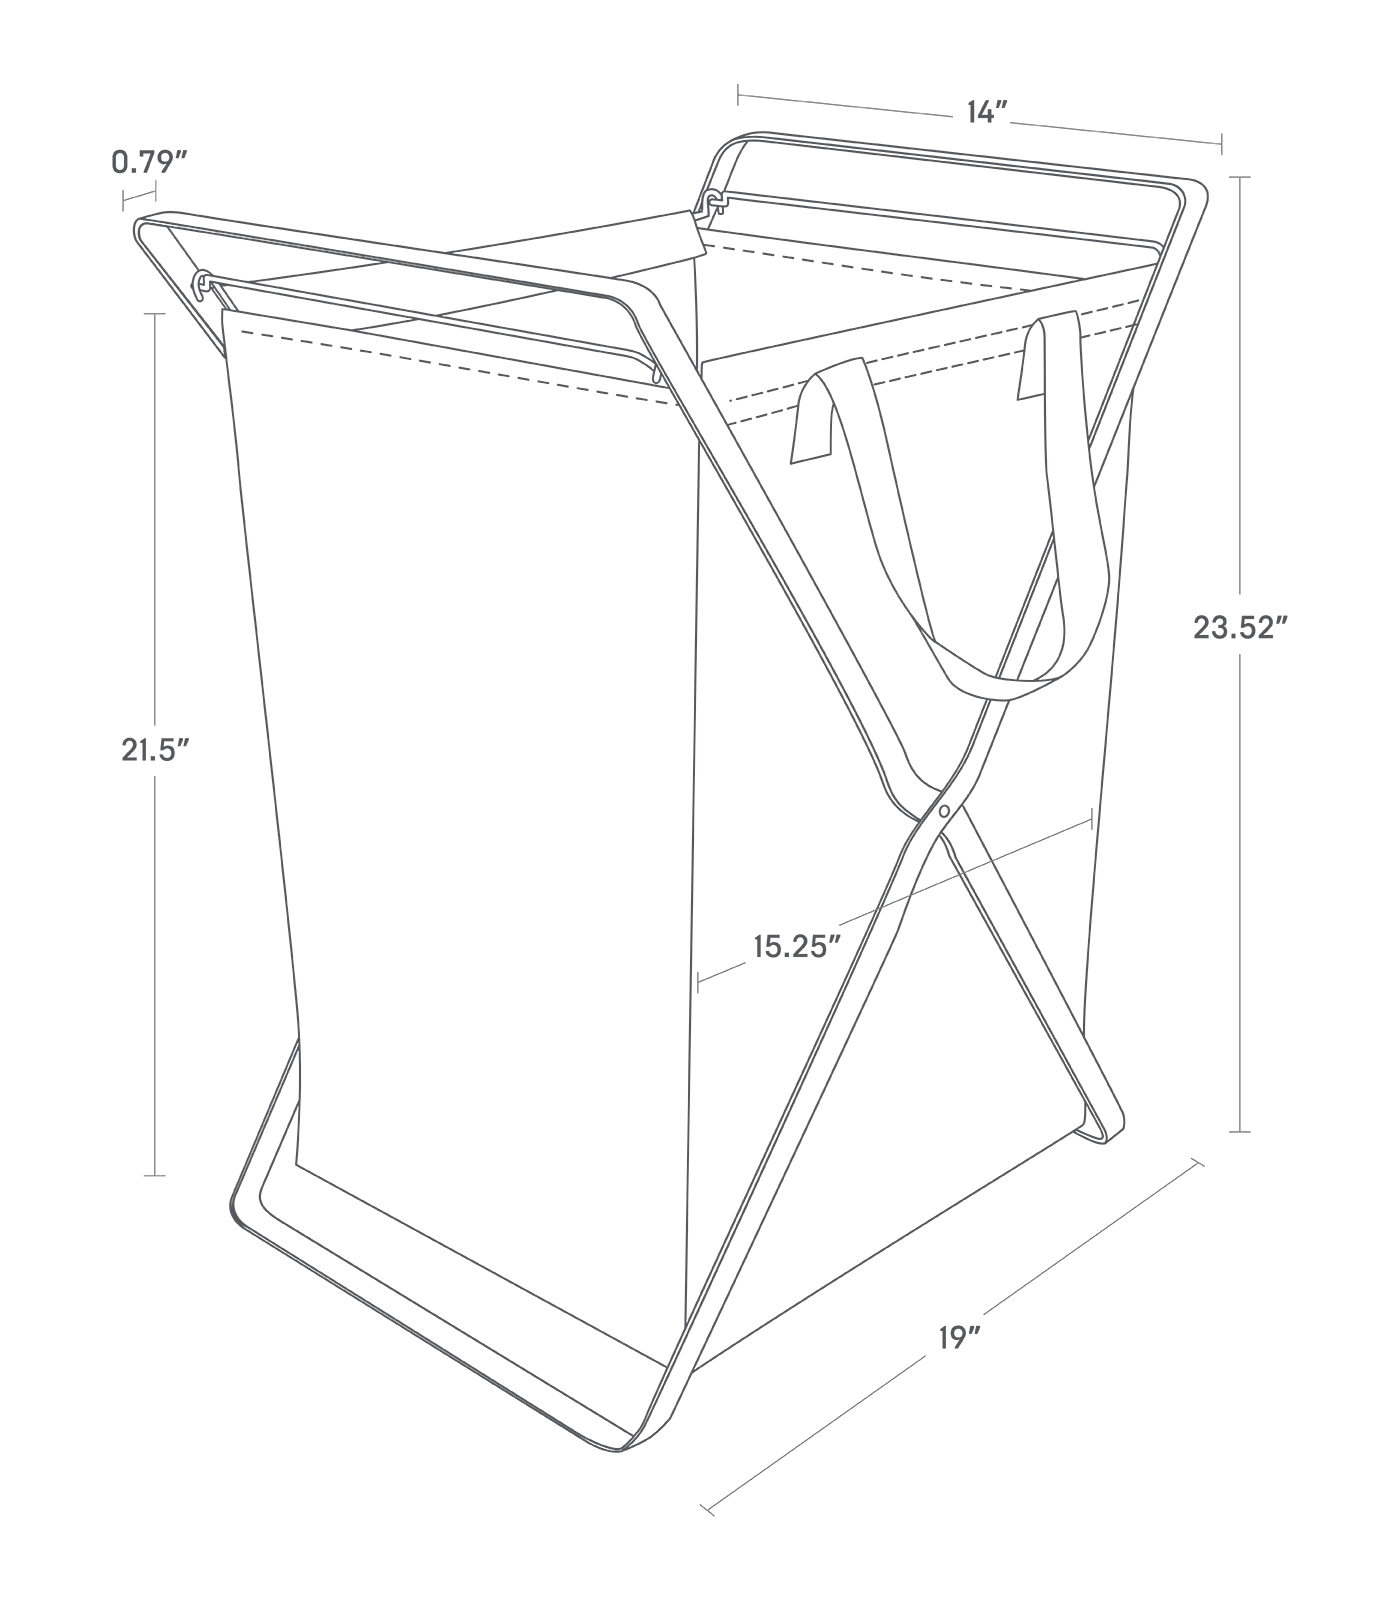 Dimension image for Laundry Hamper with Cotton Liner showing length of 14